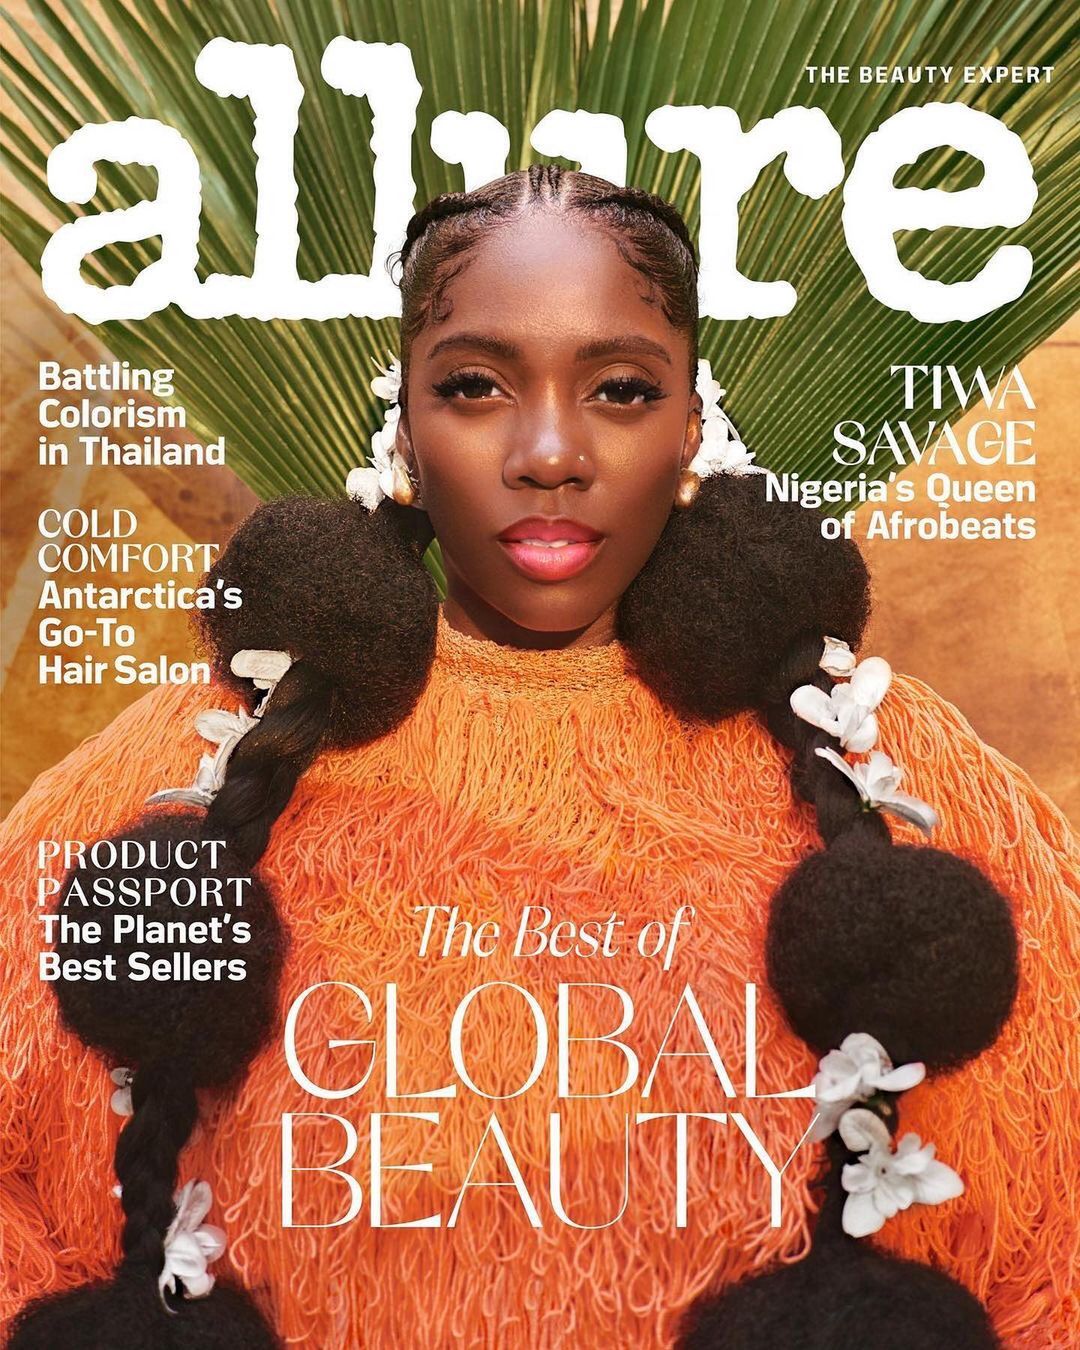 Tiwa Savage Covers Allure Magazine’s Latest Issue ‘The Best of Global Beauty’ issue.